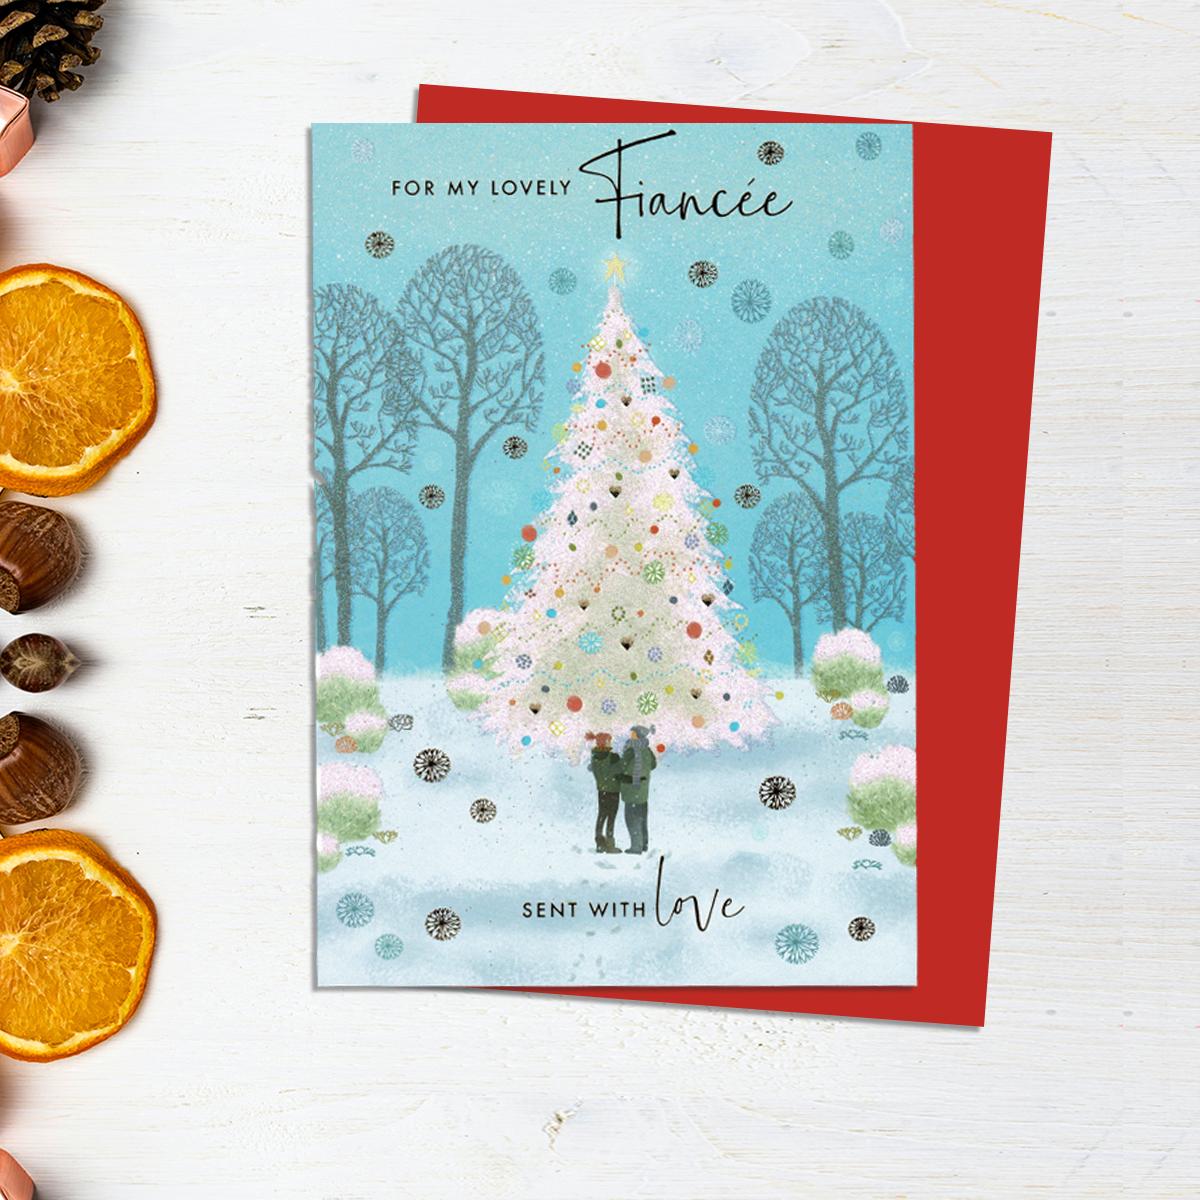 For My Lovely Fiancée Christmas card Showing A Beautiful White Sparkling Christmas Tree With a Couple Beside It. Finished With Gold Lettering And A Red Envelope